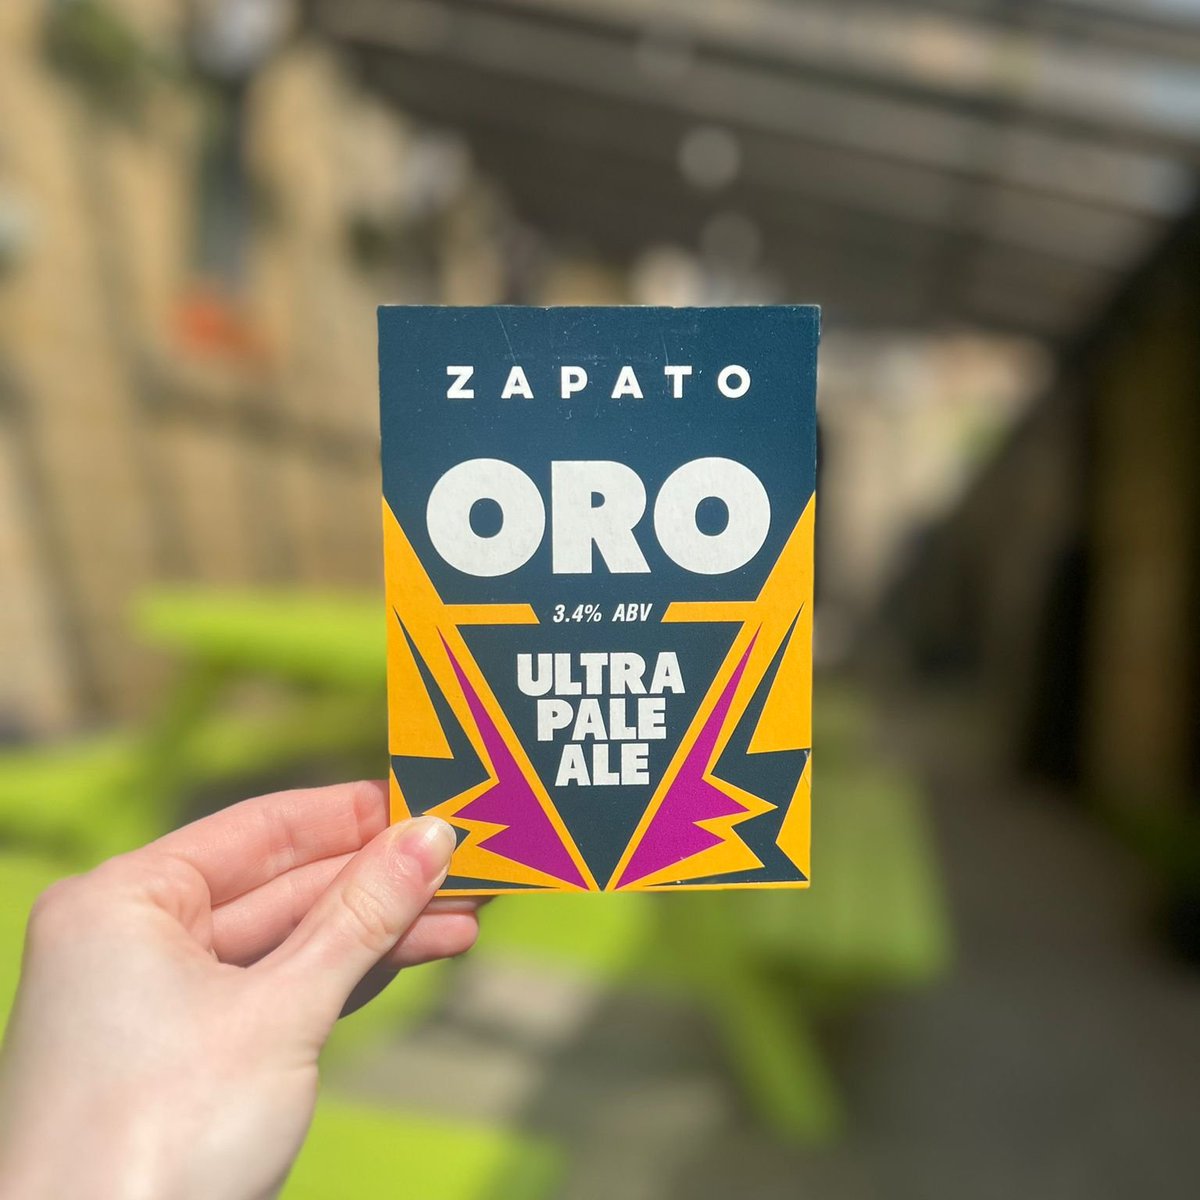 We've got Zapato Oro on today for the Huddersfield Giants game at 8pm but not just that we've also got Anais making some tasty bar snacks which you can either enjoy before you go to the game or even take with you! Come down for the sun, a pint of Oro & a tasty bar snack today